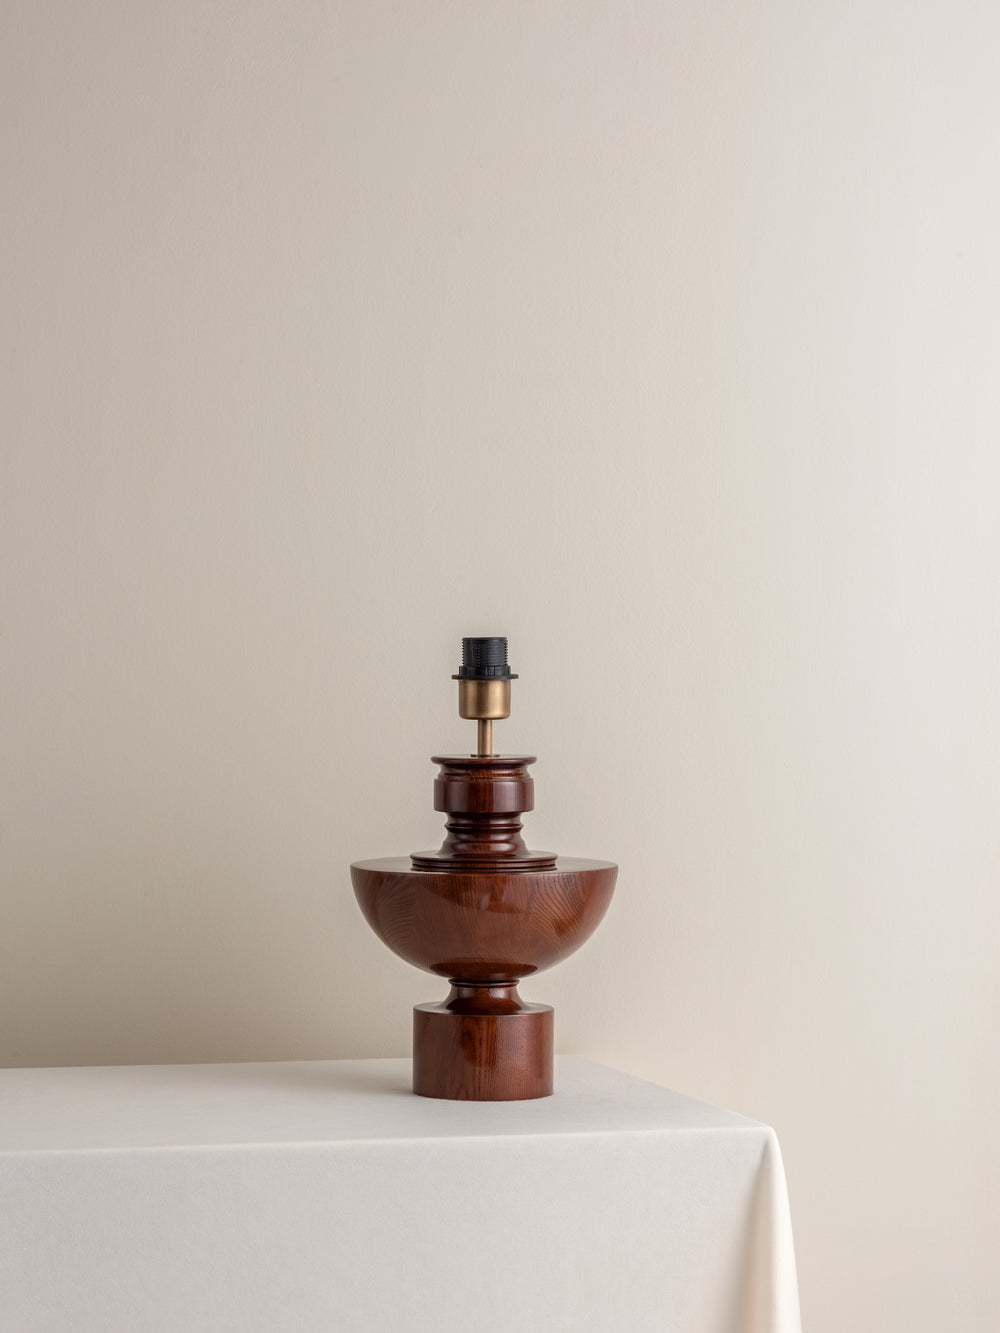 Editions spun wood lamp with + bronze shade | Table Lamp | Lights & Lamps | UK | Modern Affordable Designer Lighting